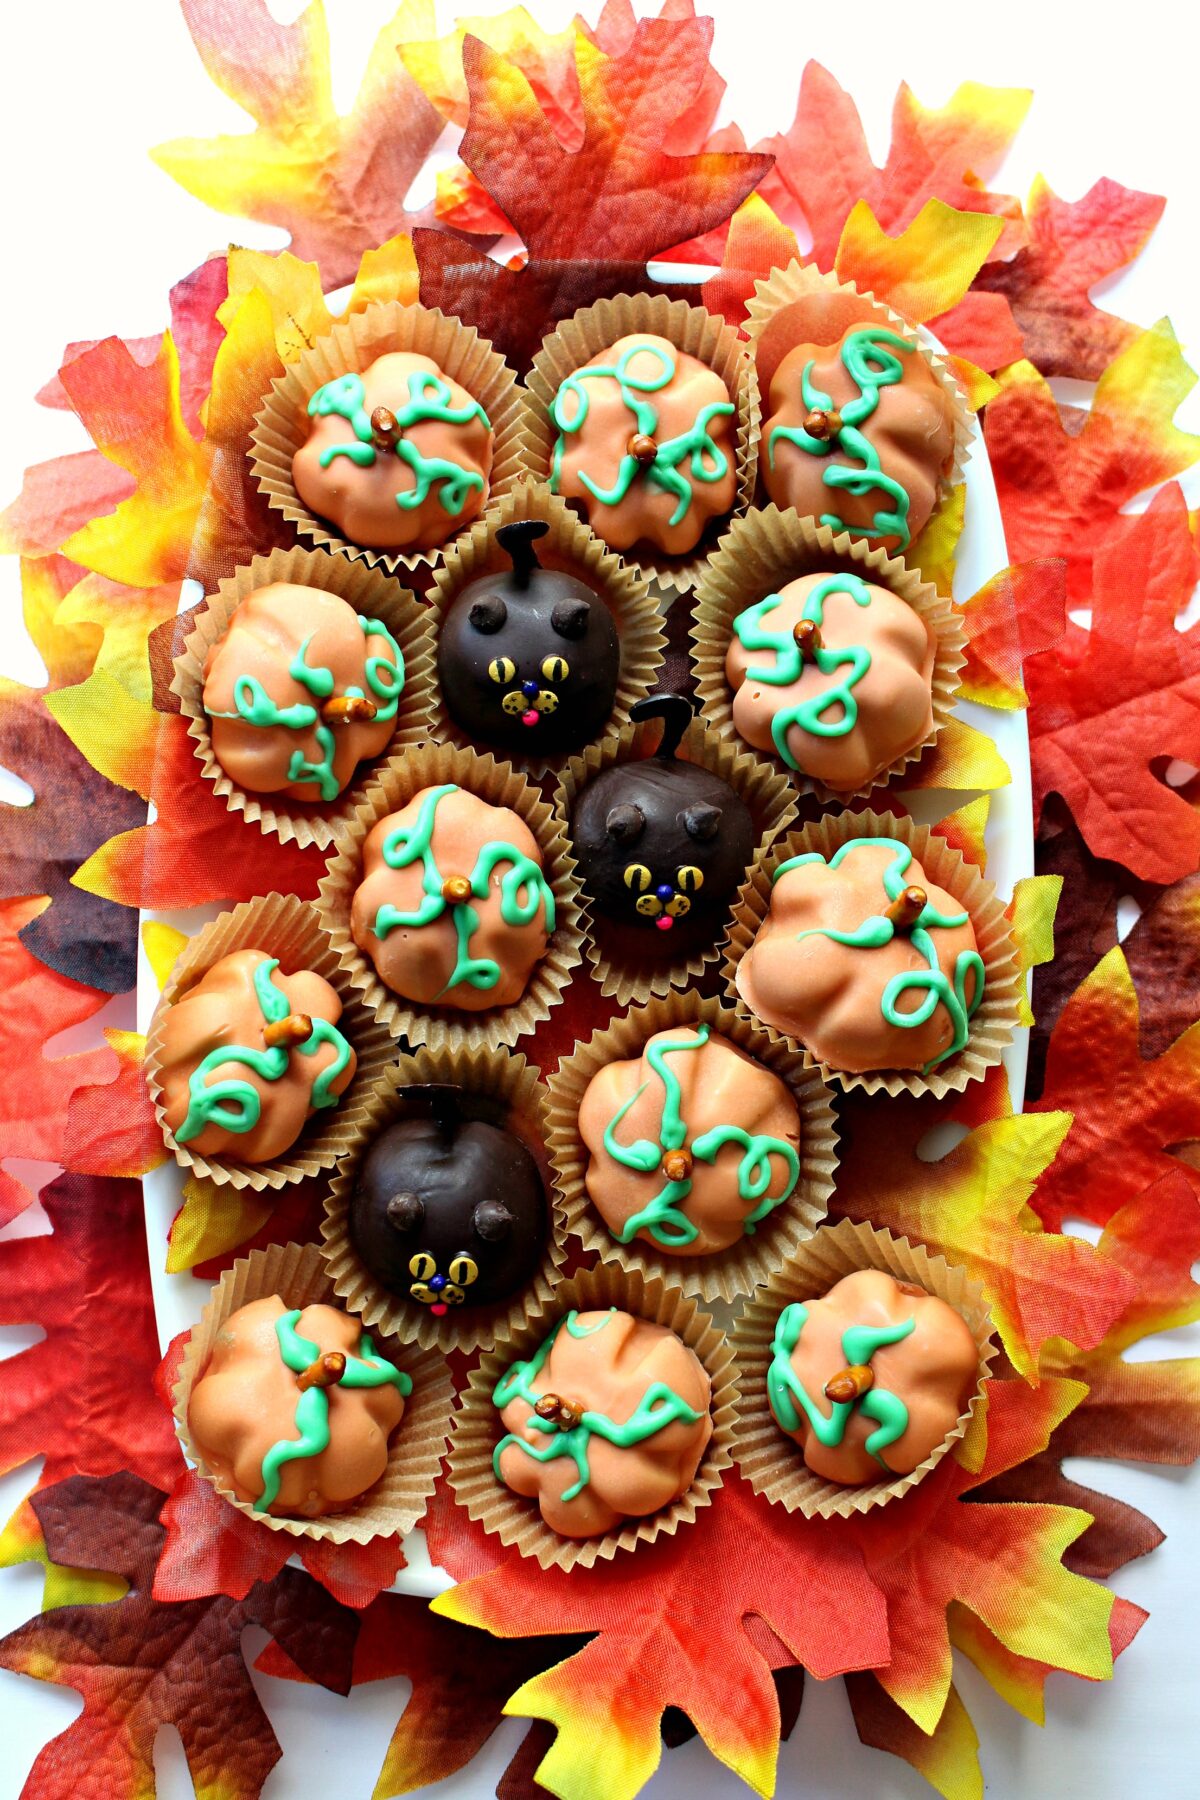 Pumpkinand Cat shaped peanut butter balls on a rectangular platter surrounded by artificial fall leaves.